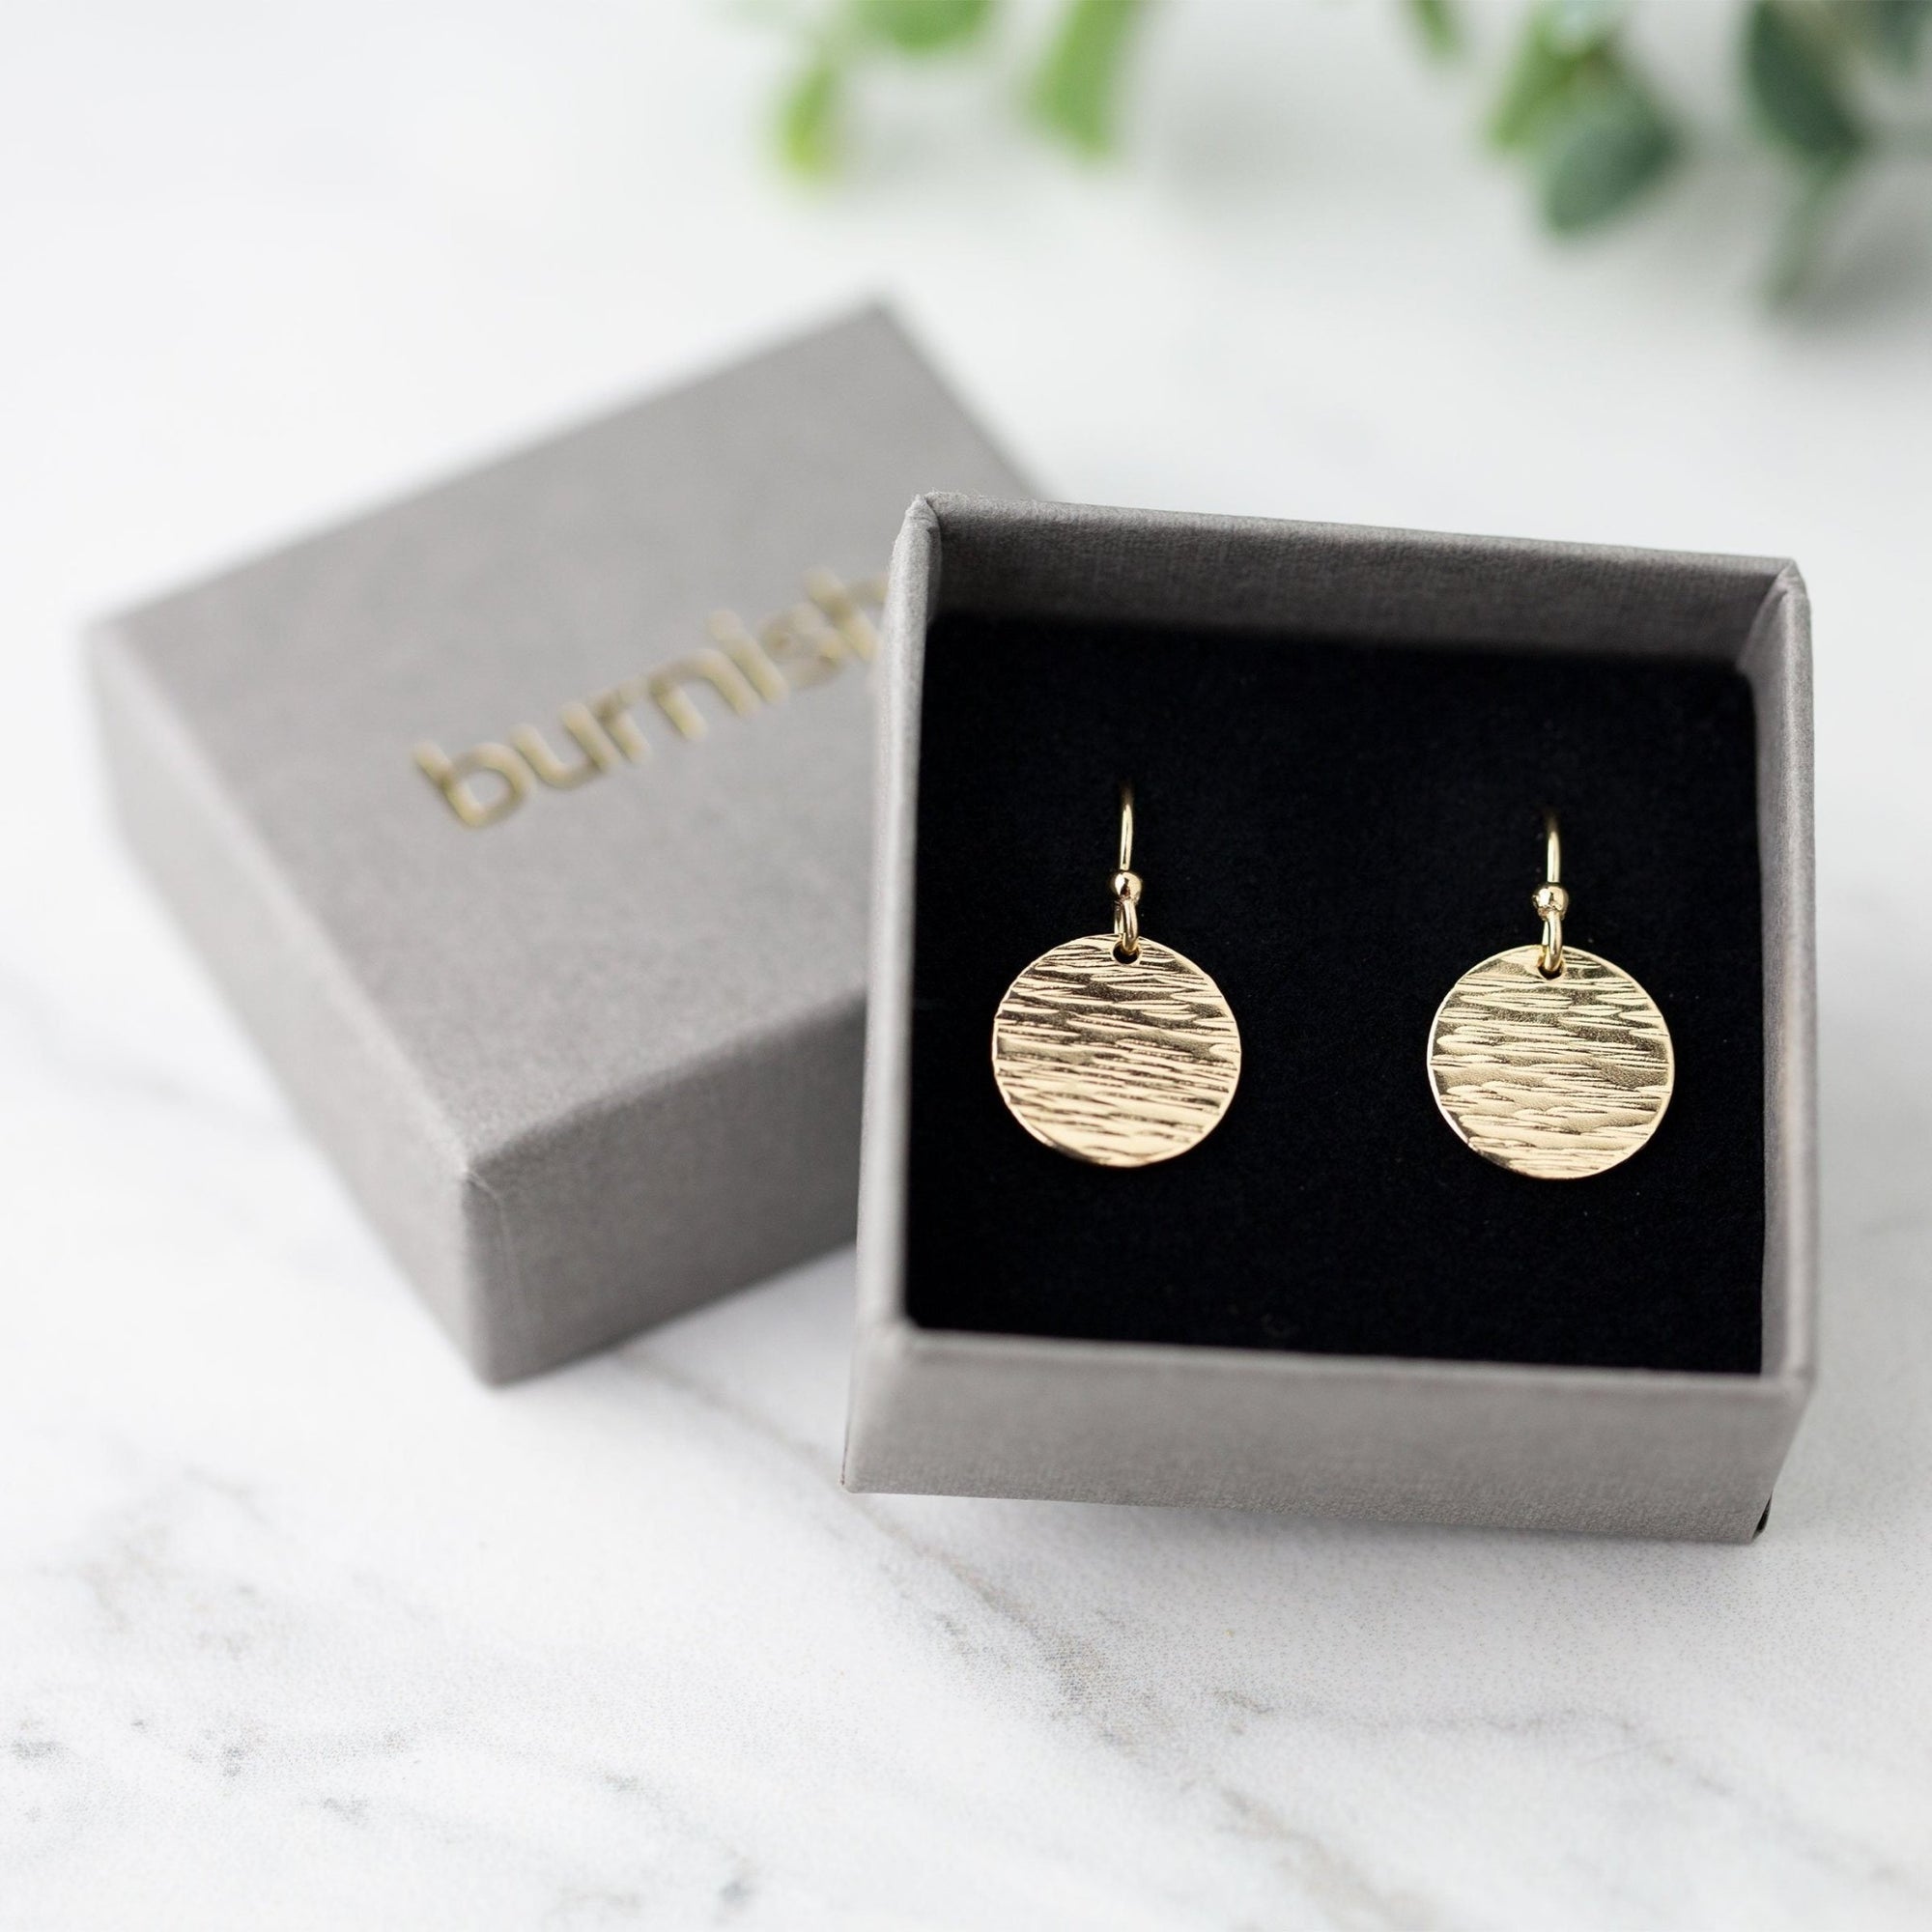 Bark Texture Gold Disk Earrings - Handmade Jewelry by Burnish